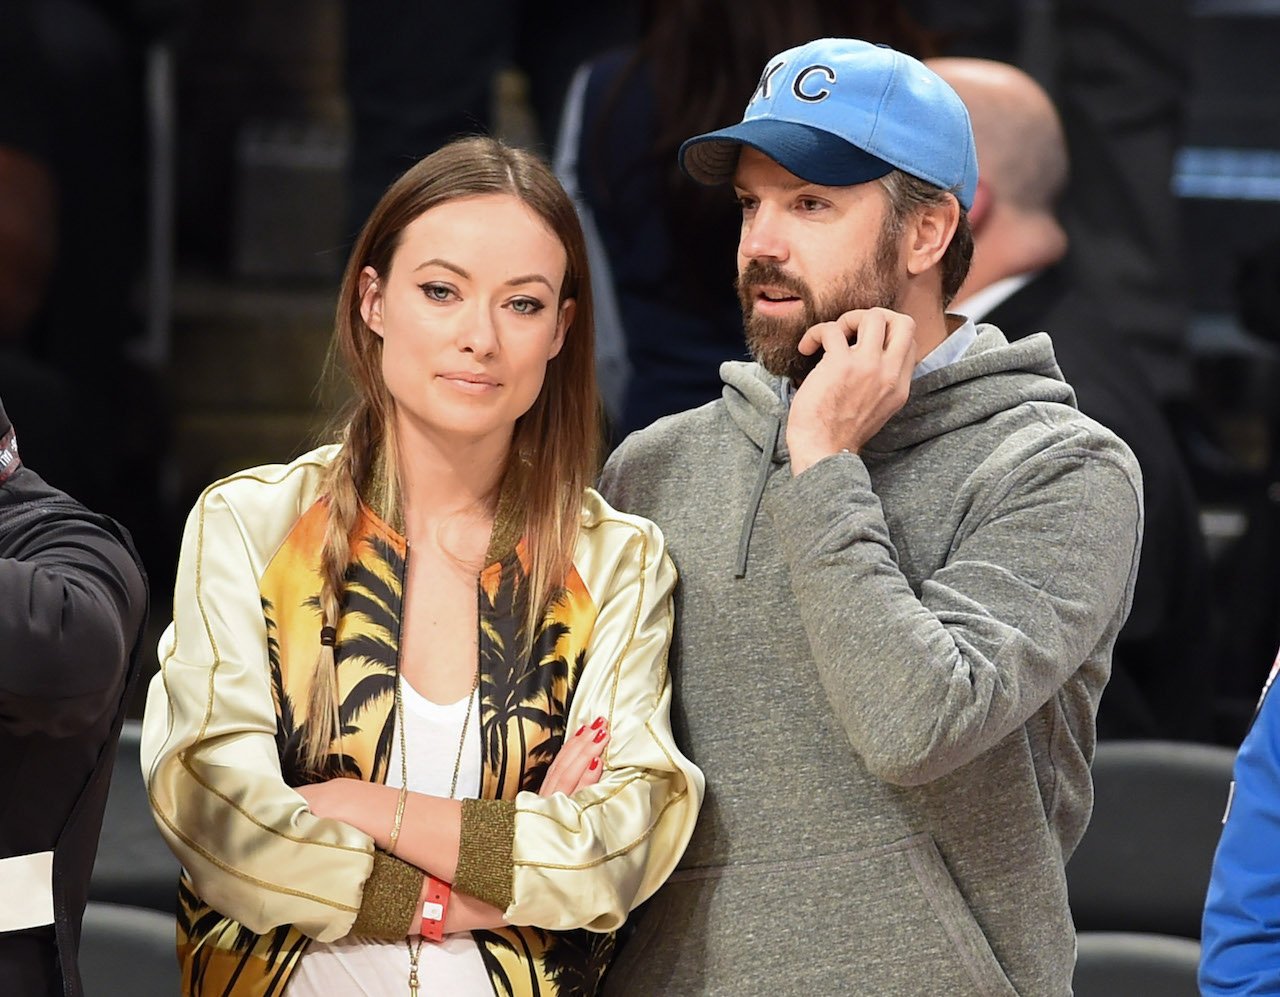 Olivia Wilde Revealed She Wasn’t Surprised That Jason Sudeikis Attempted a ‘Sabotage’ at CinemaCon